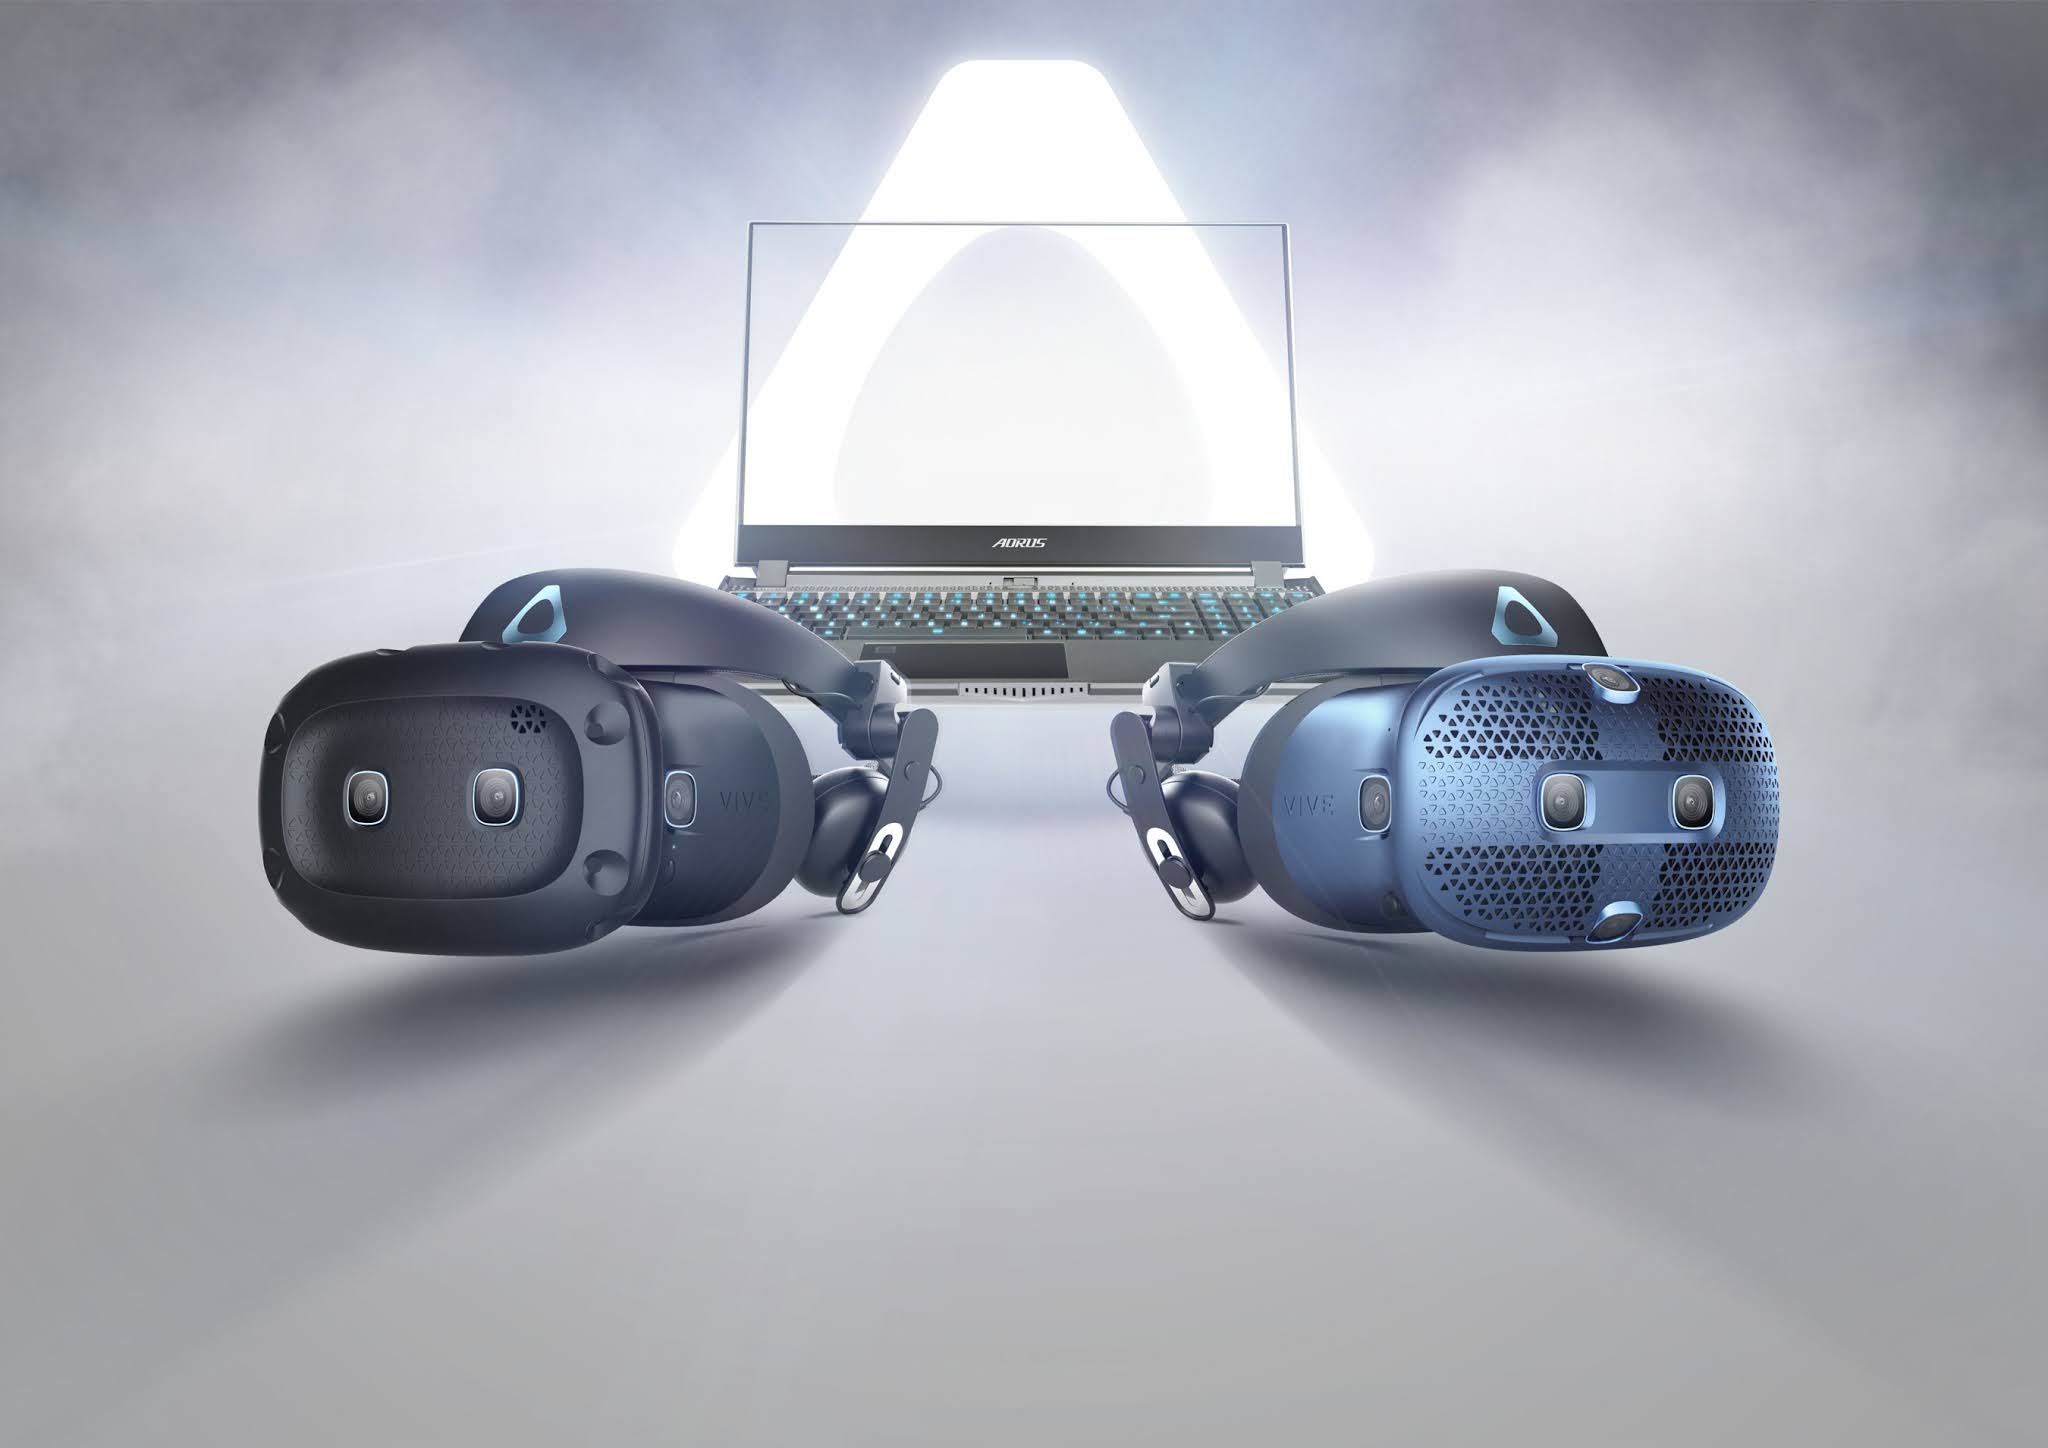 New HTC VIVE Bundle Brings Powerful Consumer VR Straight Out Of The Box